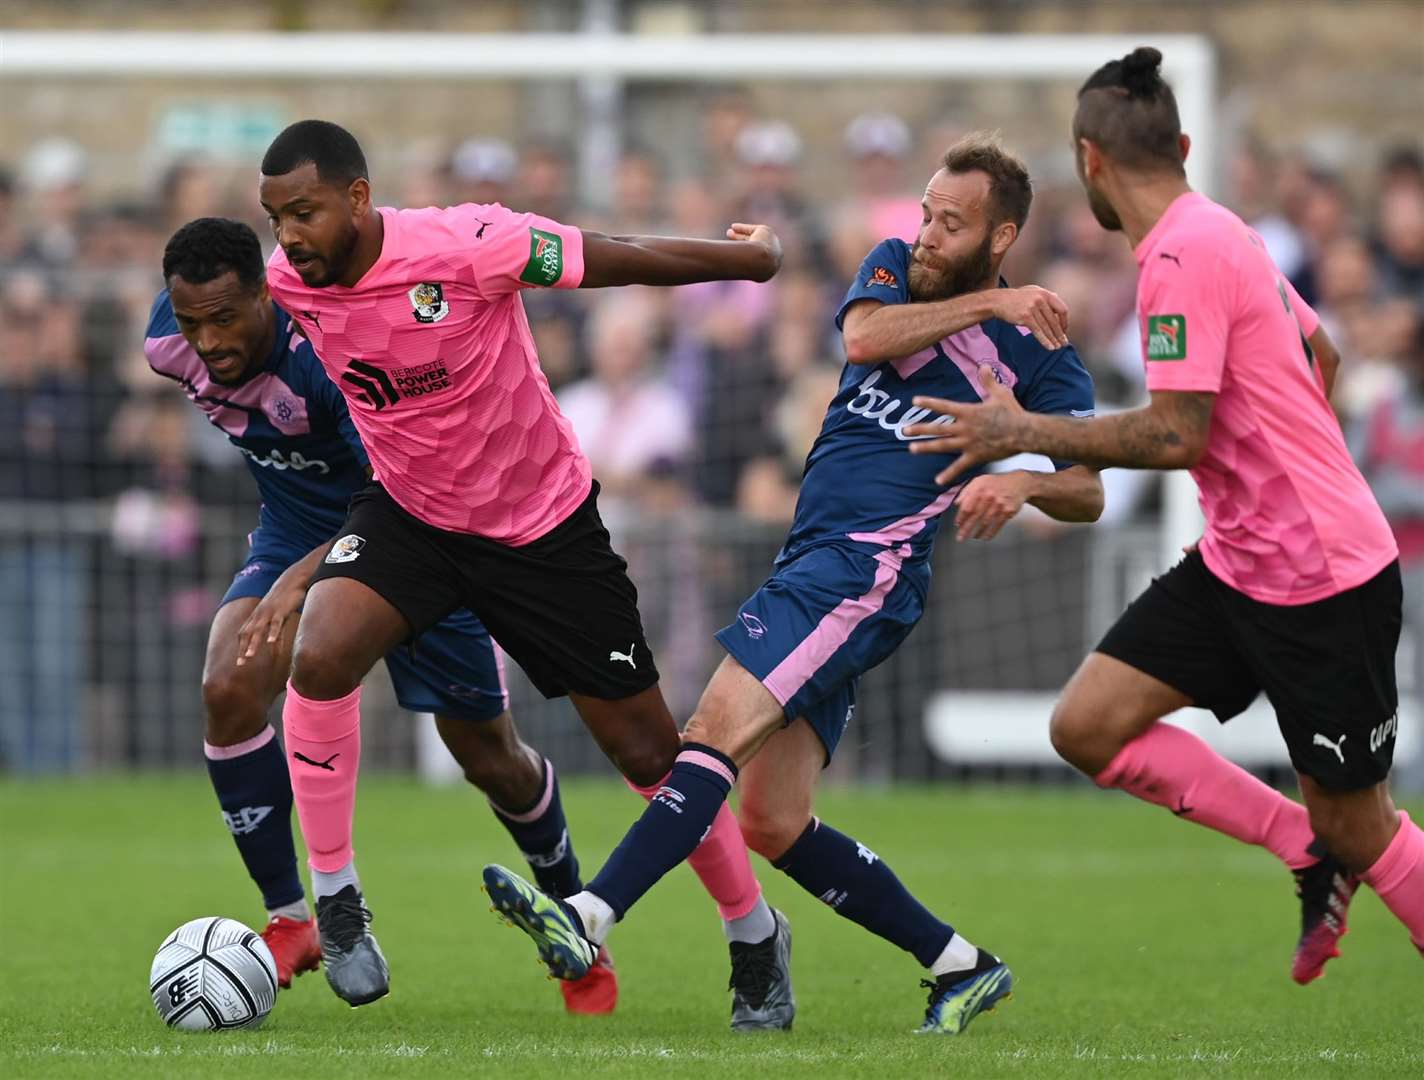 Keiran Murtagh charges through the midfield for Dartford against Dulwich. Picture: Keith Gillard